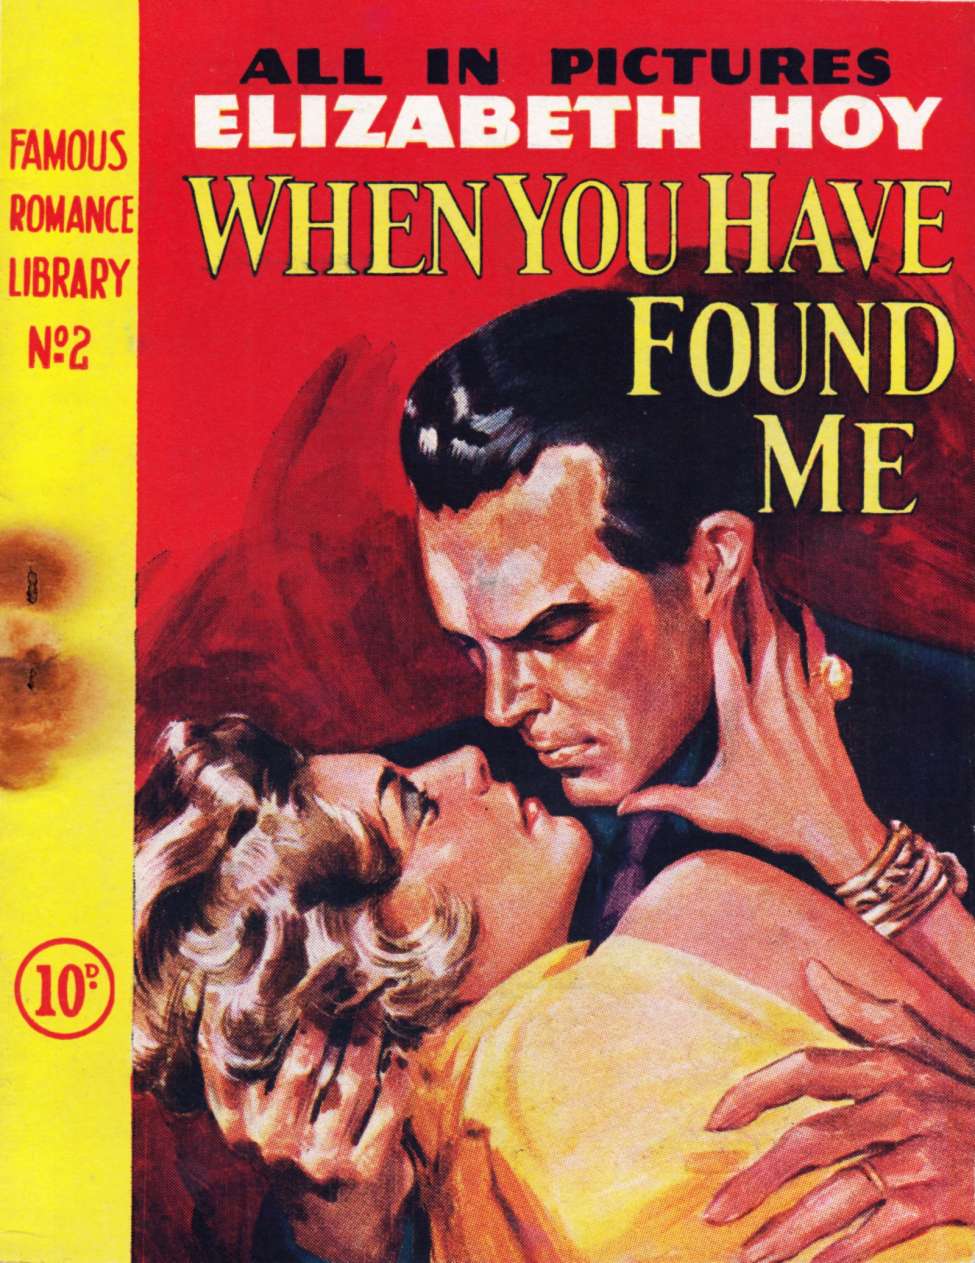 Book Cover For Famous Romance Library 2 - When You Have Found Me